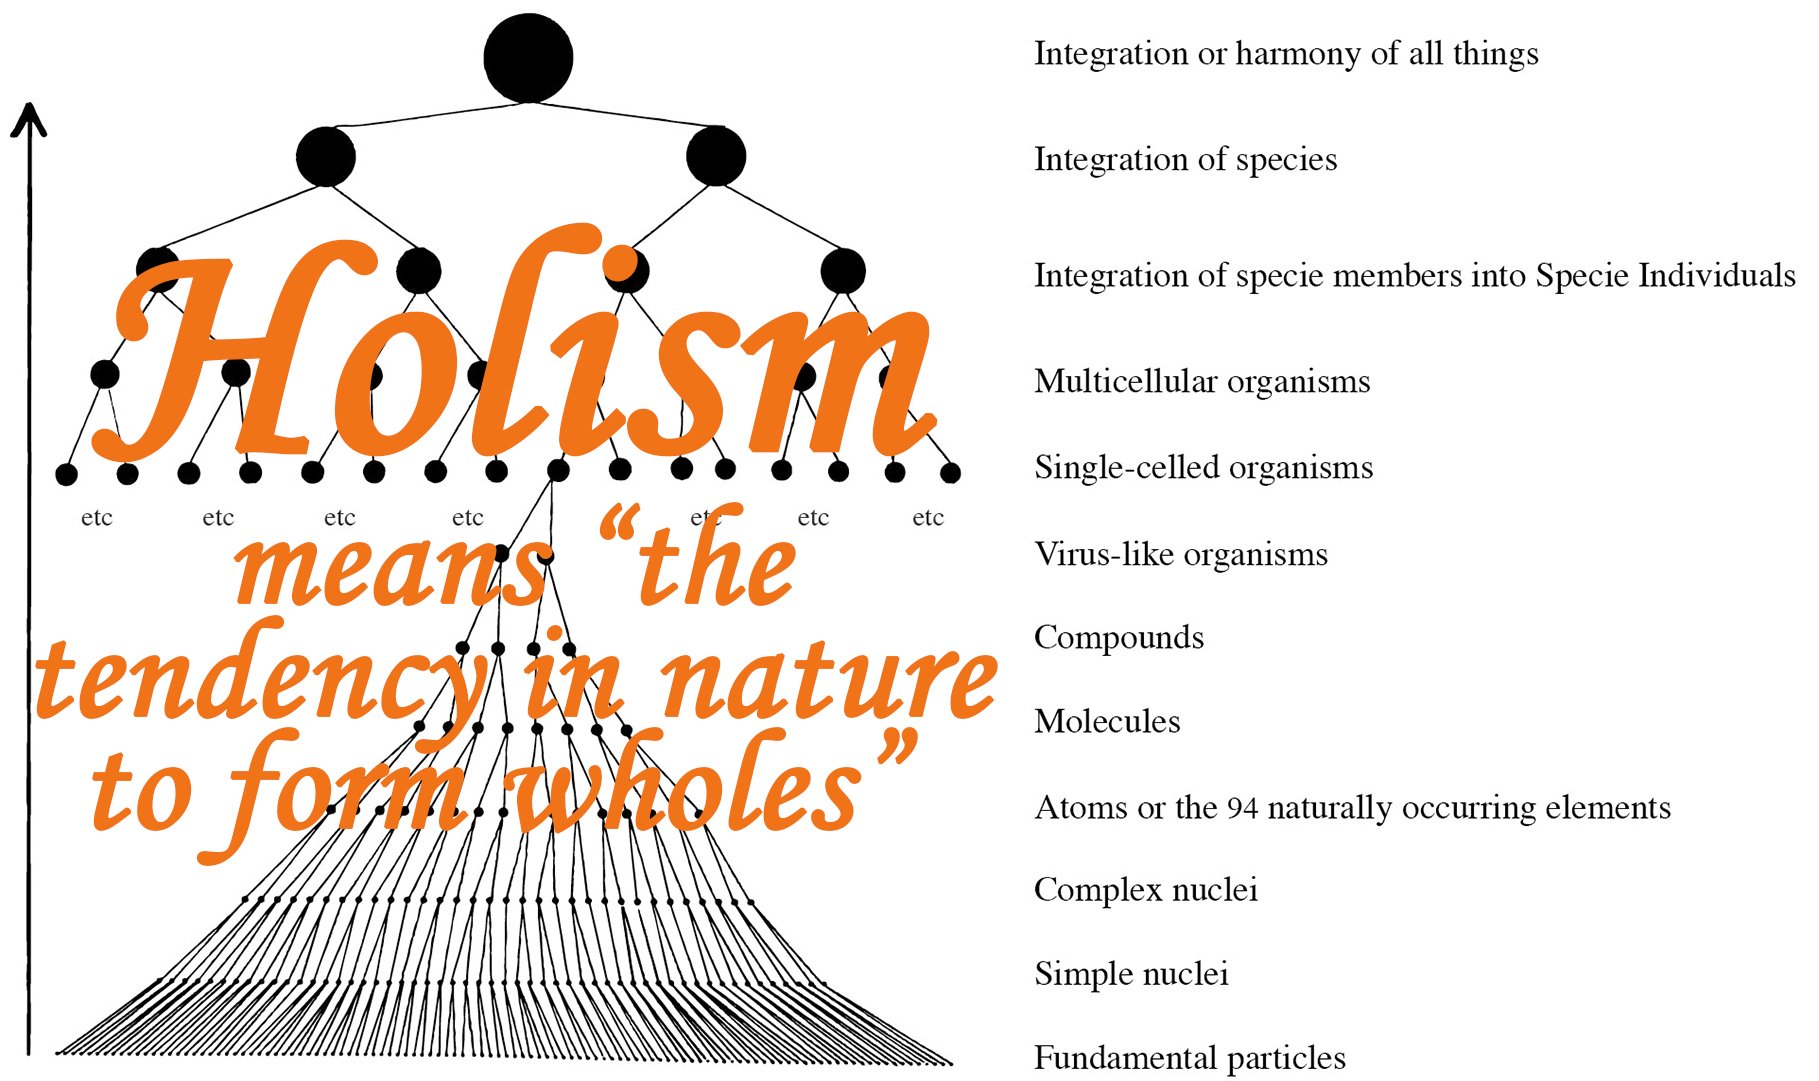 Holism - The Tendency in Nature to Form Wholes